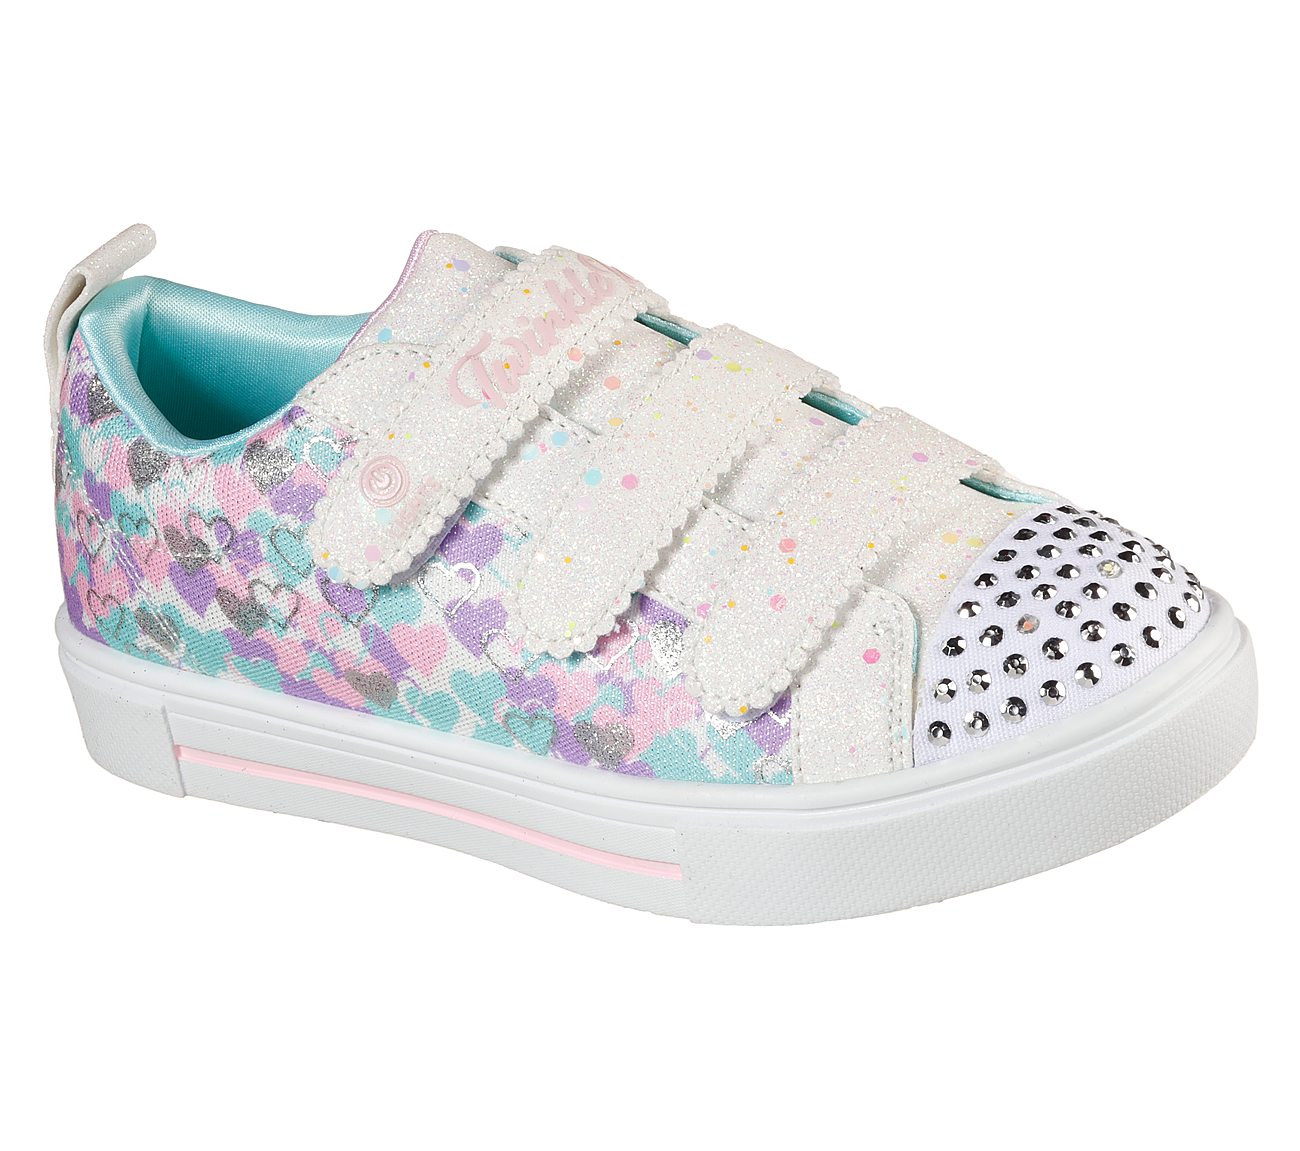 Shining Hearts SKECHERS Twinkle Toes Shoes